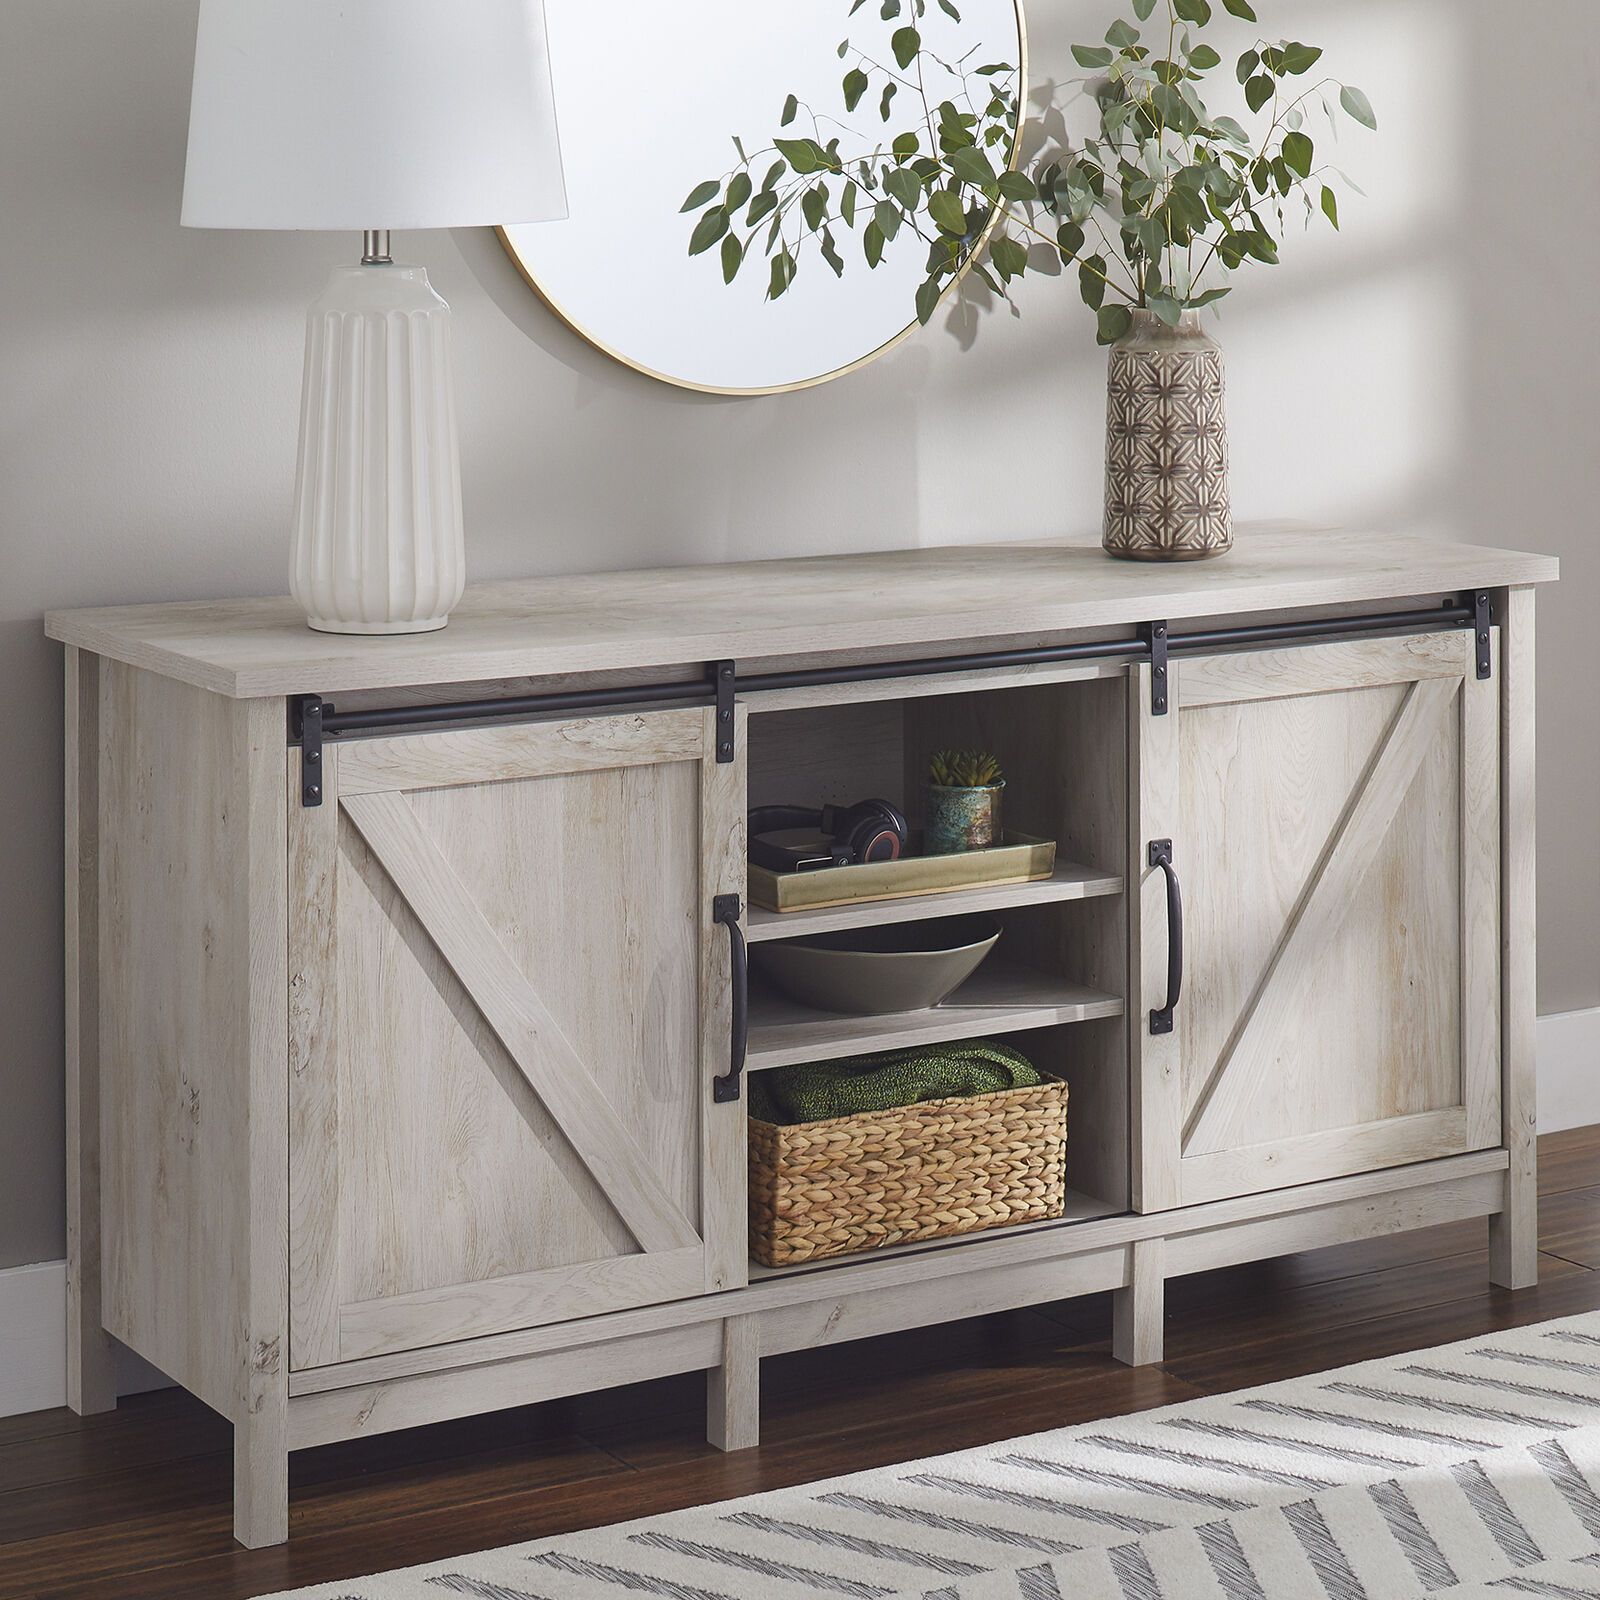 Modern Farmhouse 70" Tv Stand Entertainment Center Console Credenza Rustic  White | Ebay In Modern Farmhouse Rustic Tv Stands (View 13 of 15)